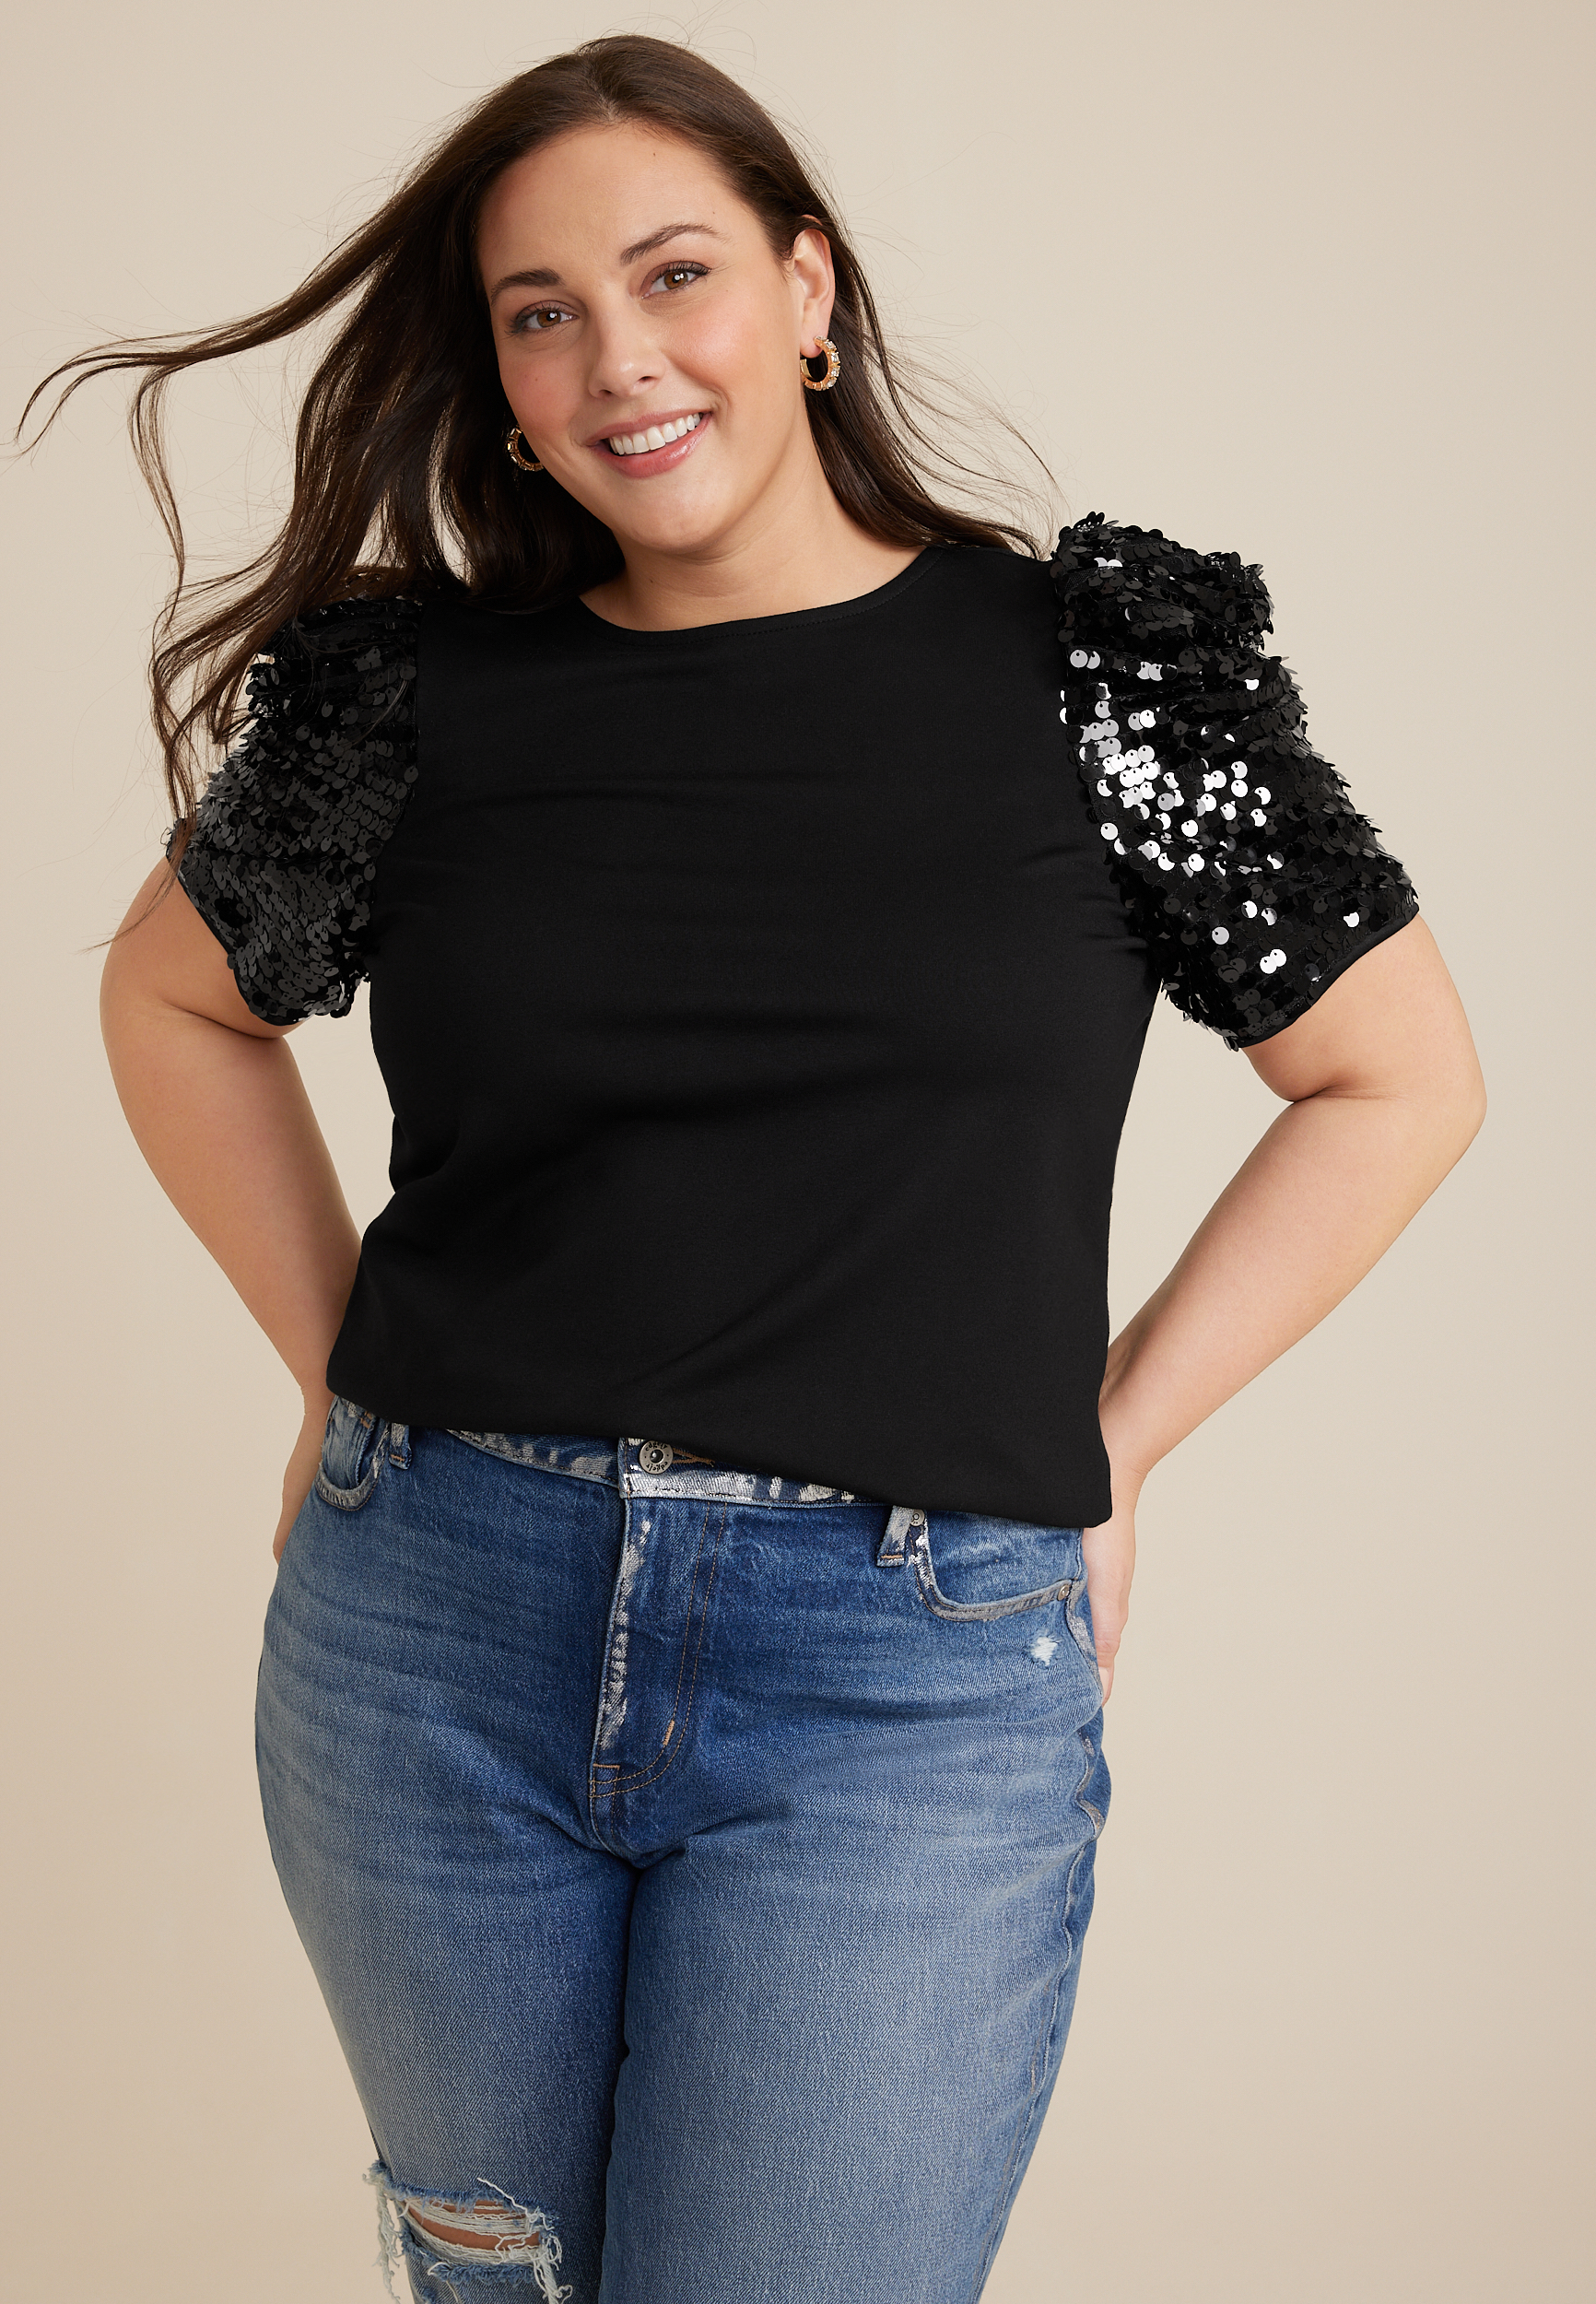 PUTEARDAT Plus Size Sexy Tops,Coupon Deals,Women Shirts Clearance,top Deals, Women Plus Size Jackets on Clearance,Womens Tops and Blouses Clearance,Overstock  Clearance A-Black at  Women's Clothing store